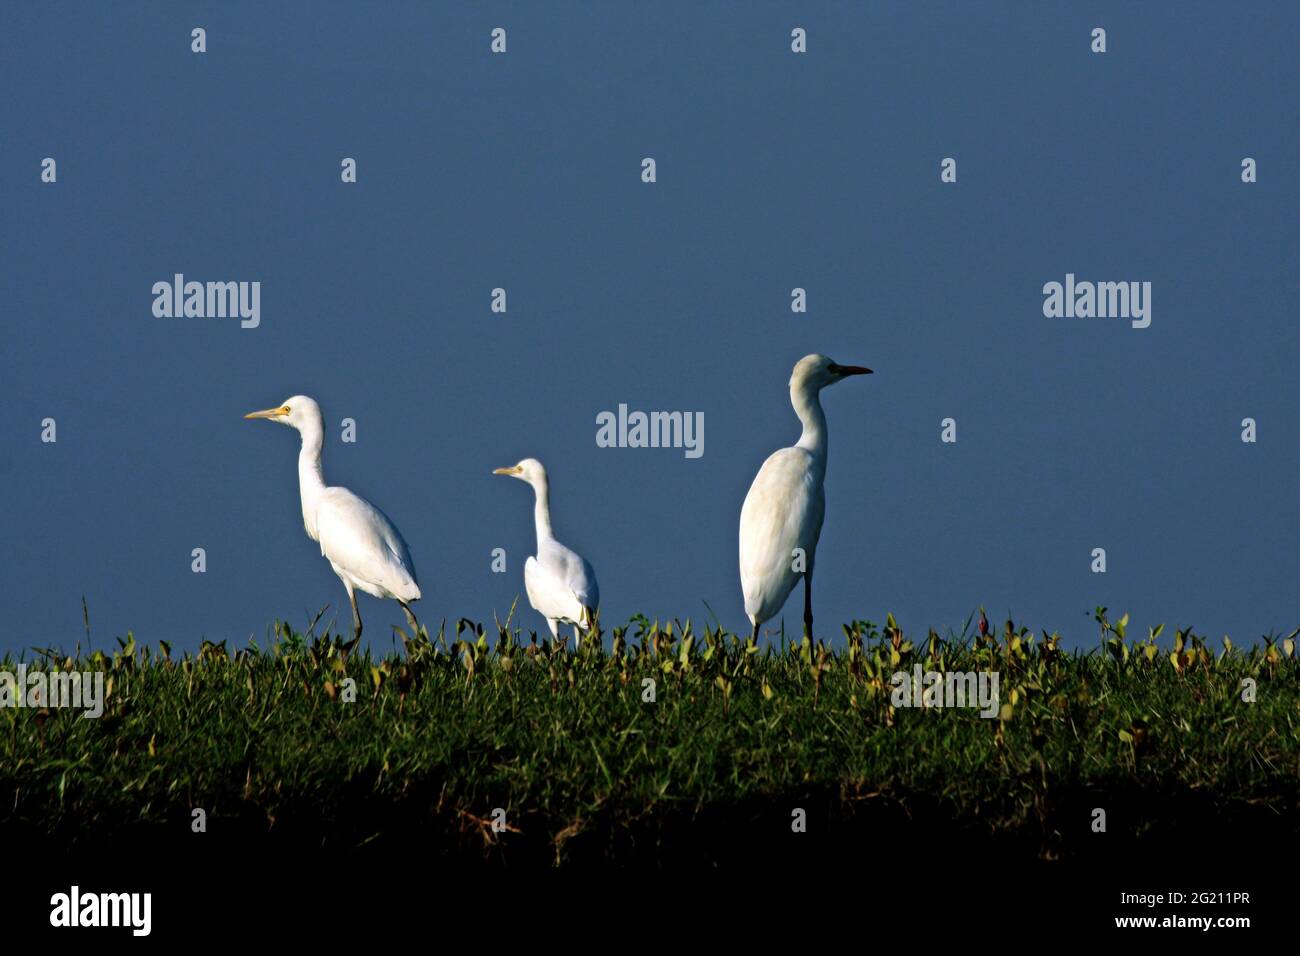 The Cattle Egret, Bubulcus ibis, locally known as ‘go bok’ is a small white heron found near water-bodies, cultivated fields, usually near grazing cattle. Nijhum Dwip, Noakhali, Bangladesh. October 30, 2009. Stock Photo